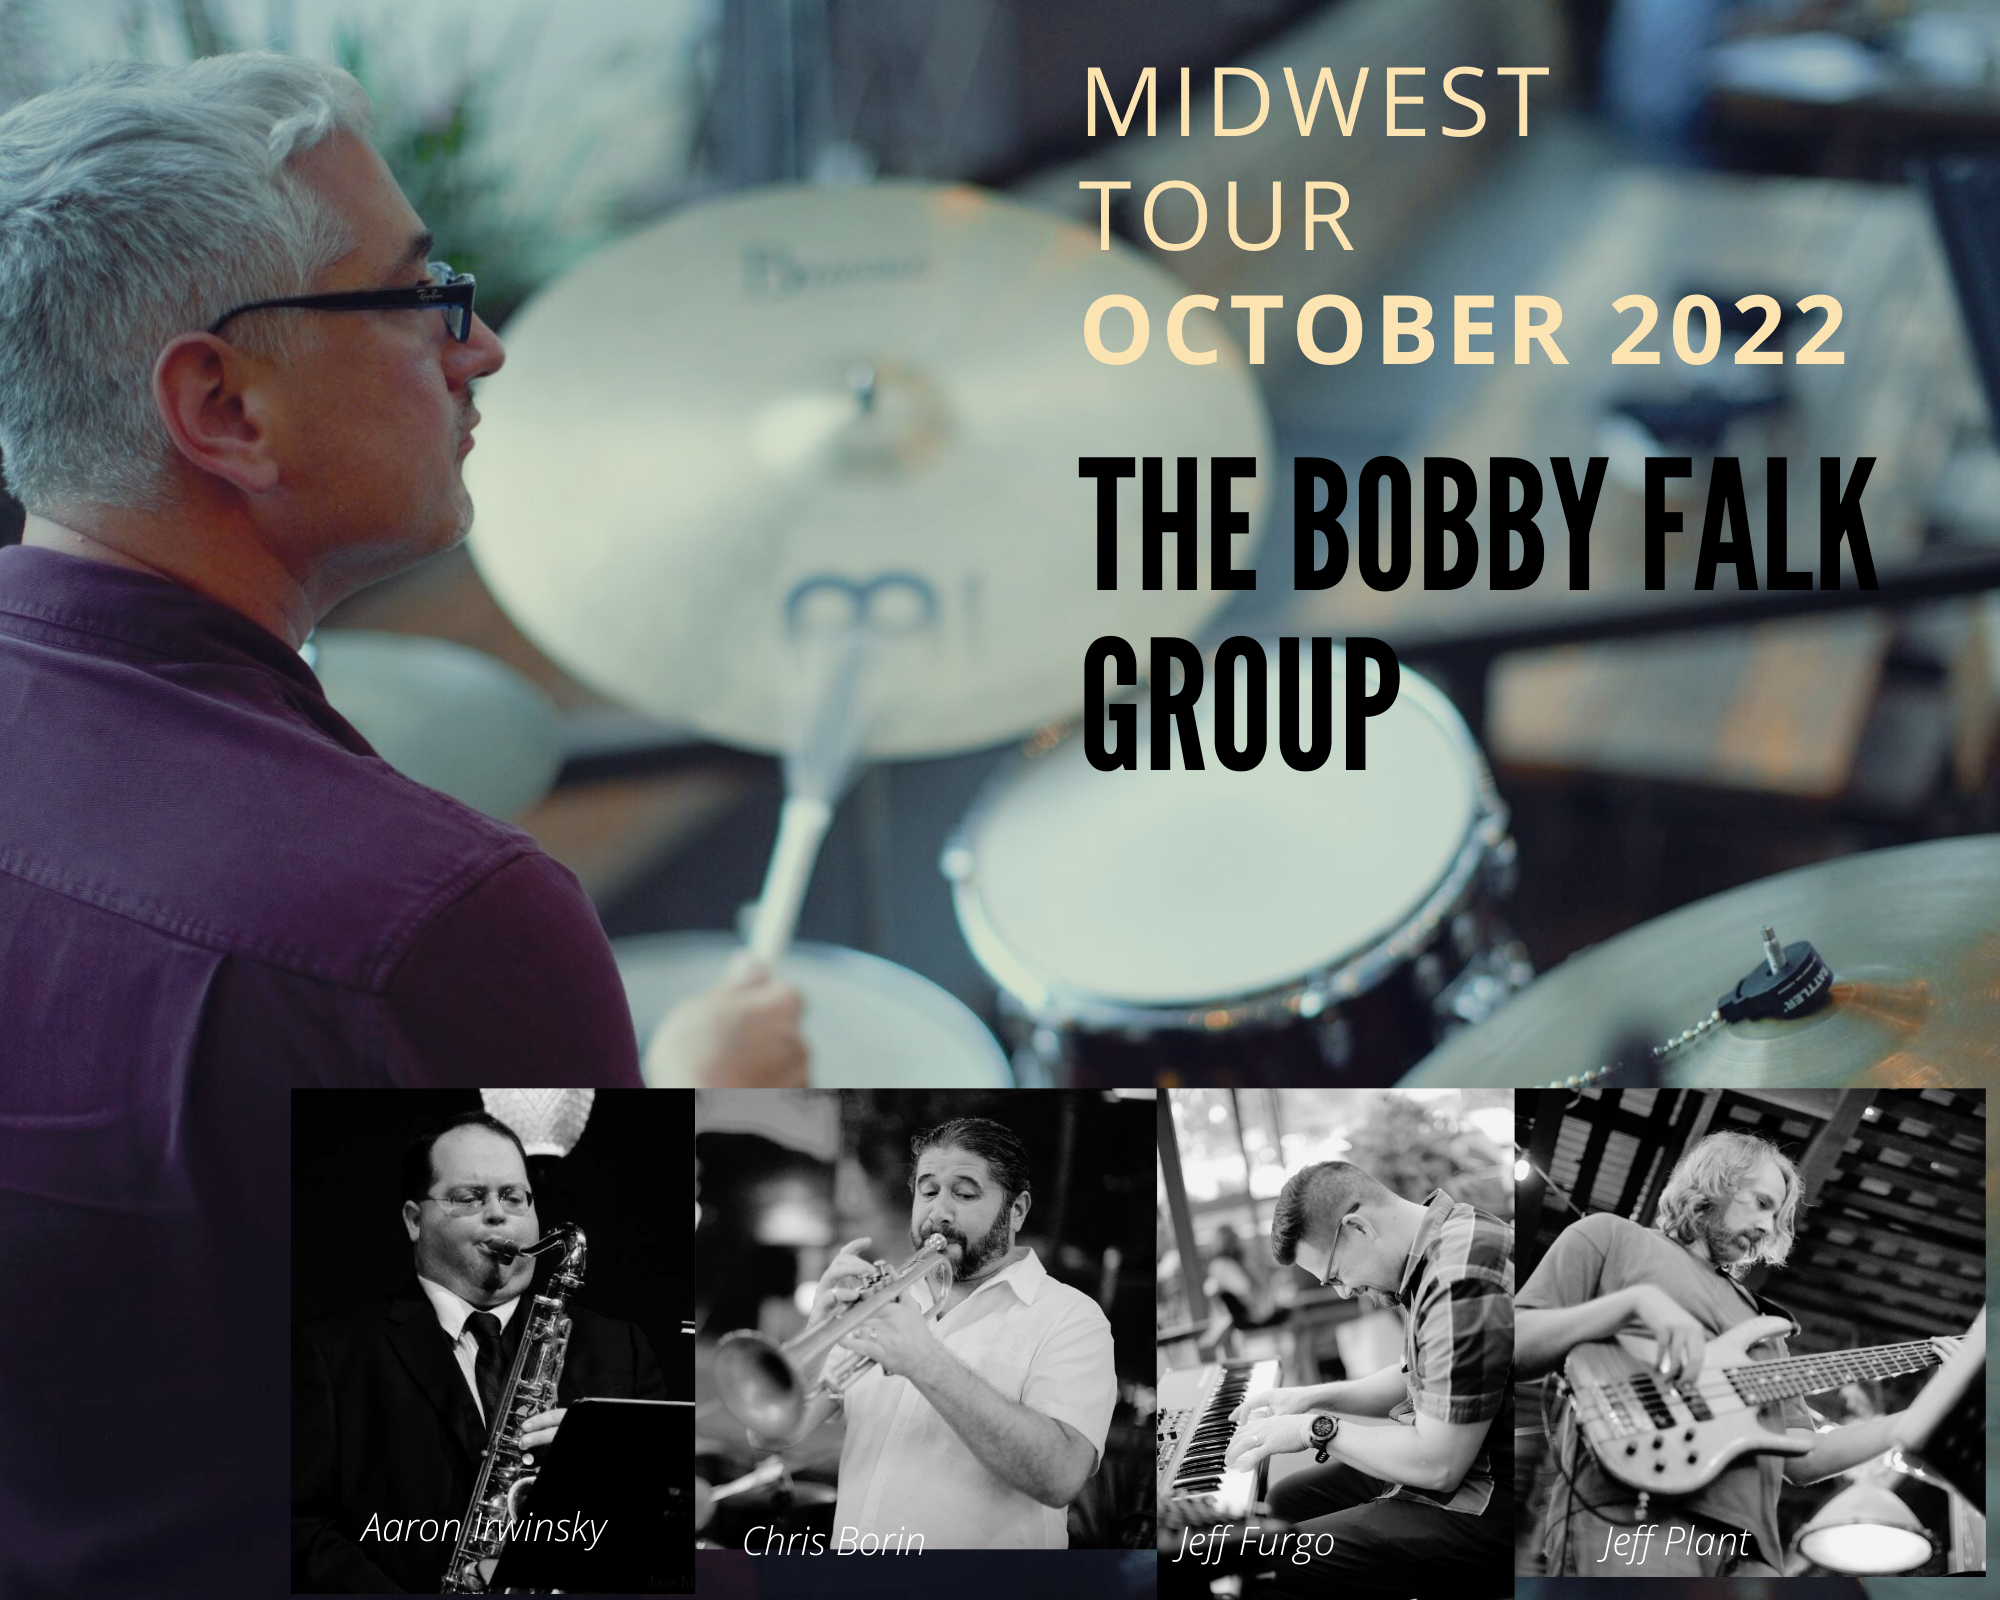 Bobby Falk Group – featuring special guests